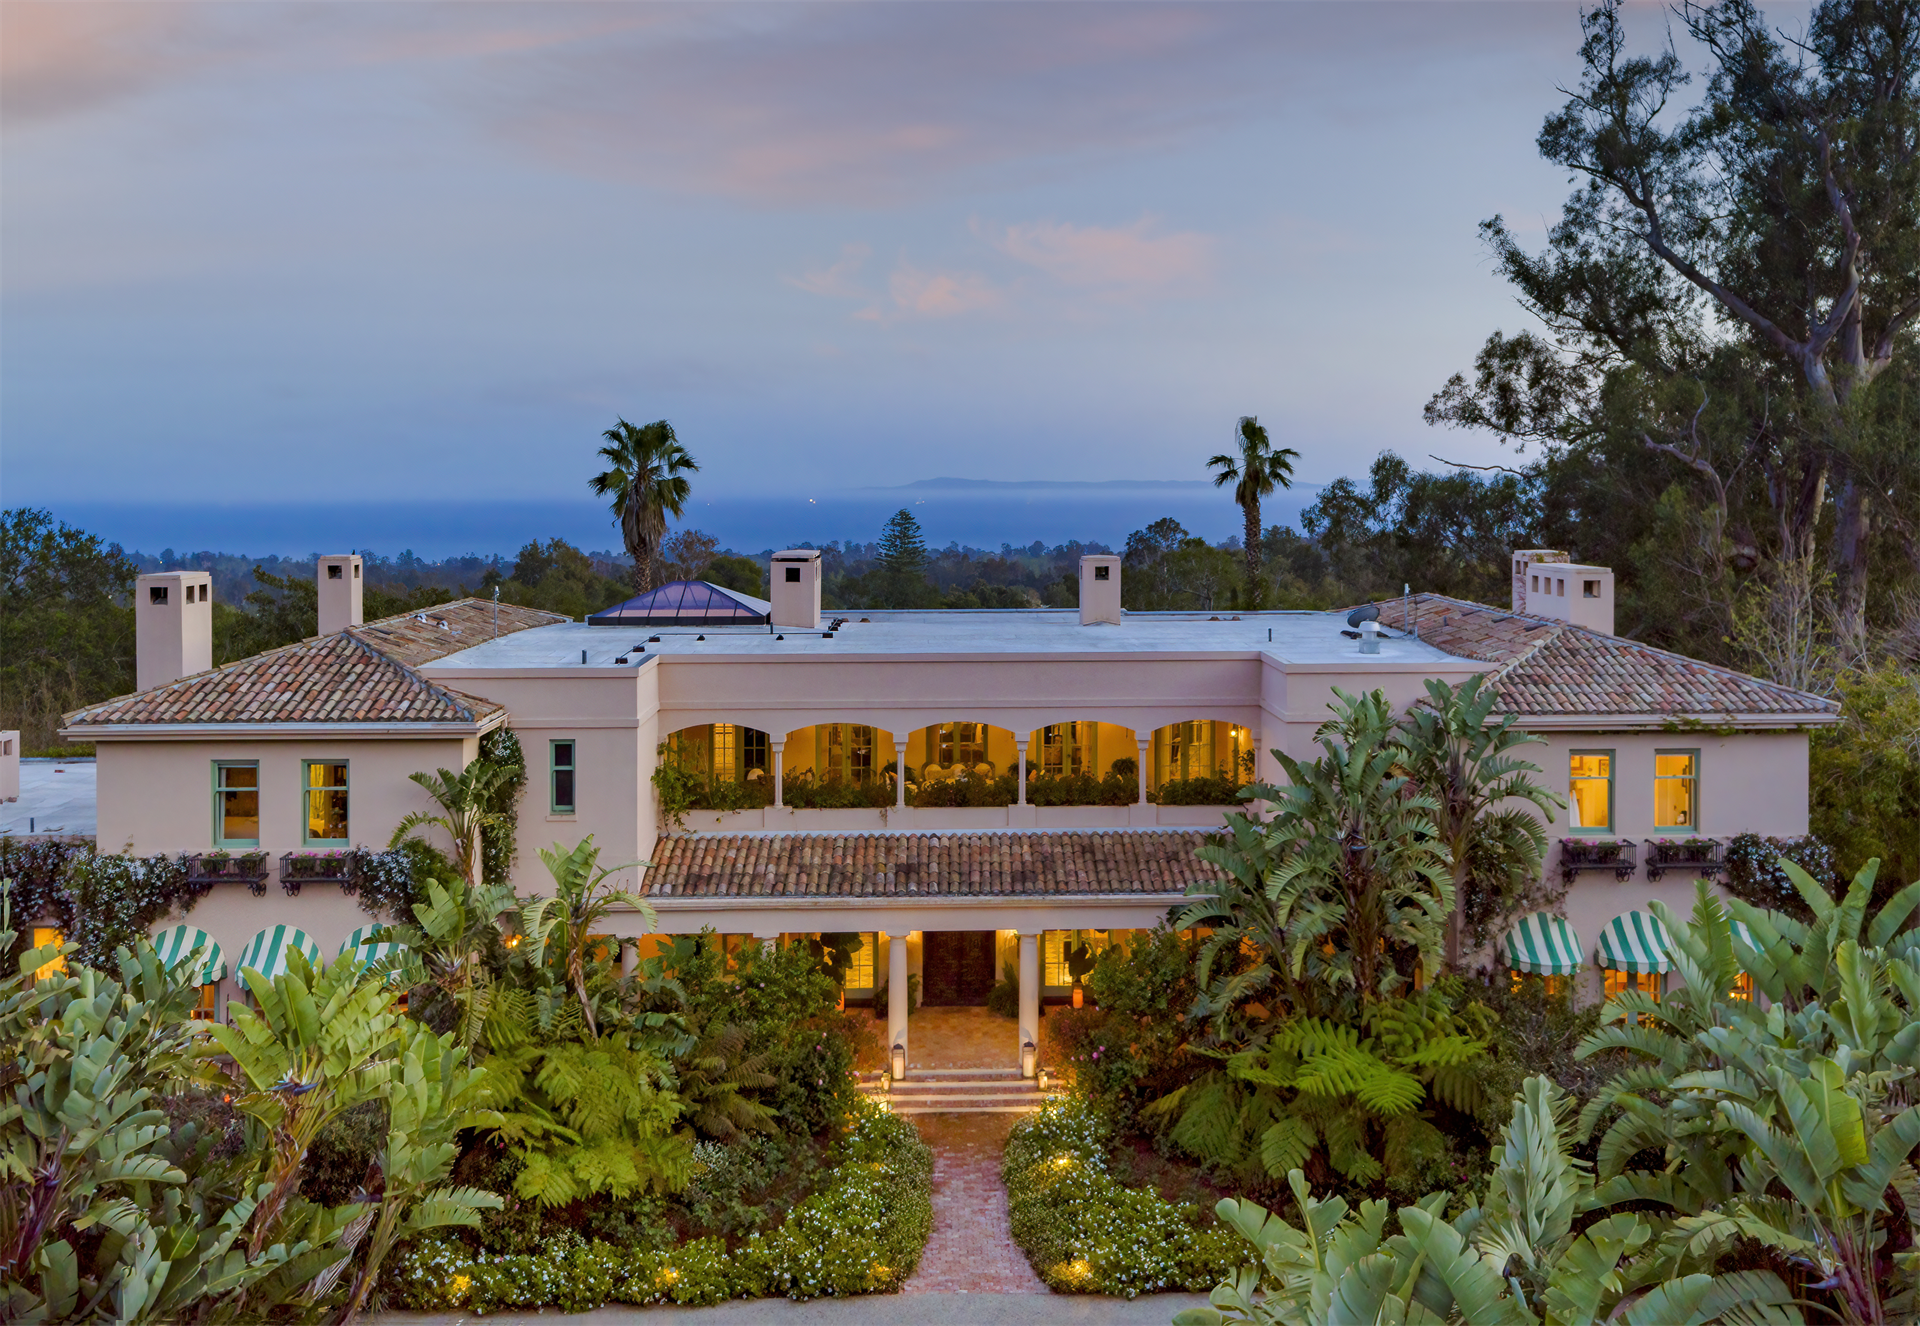 670 Hot Springs Rd a Luxury Estate for Sale